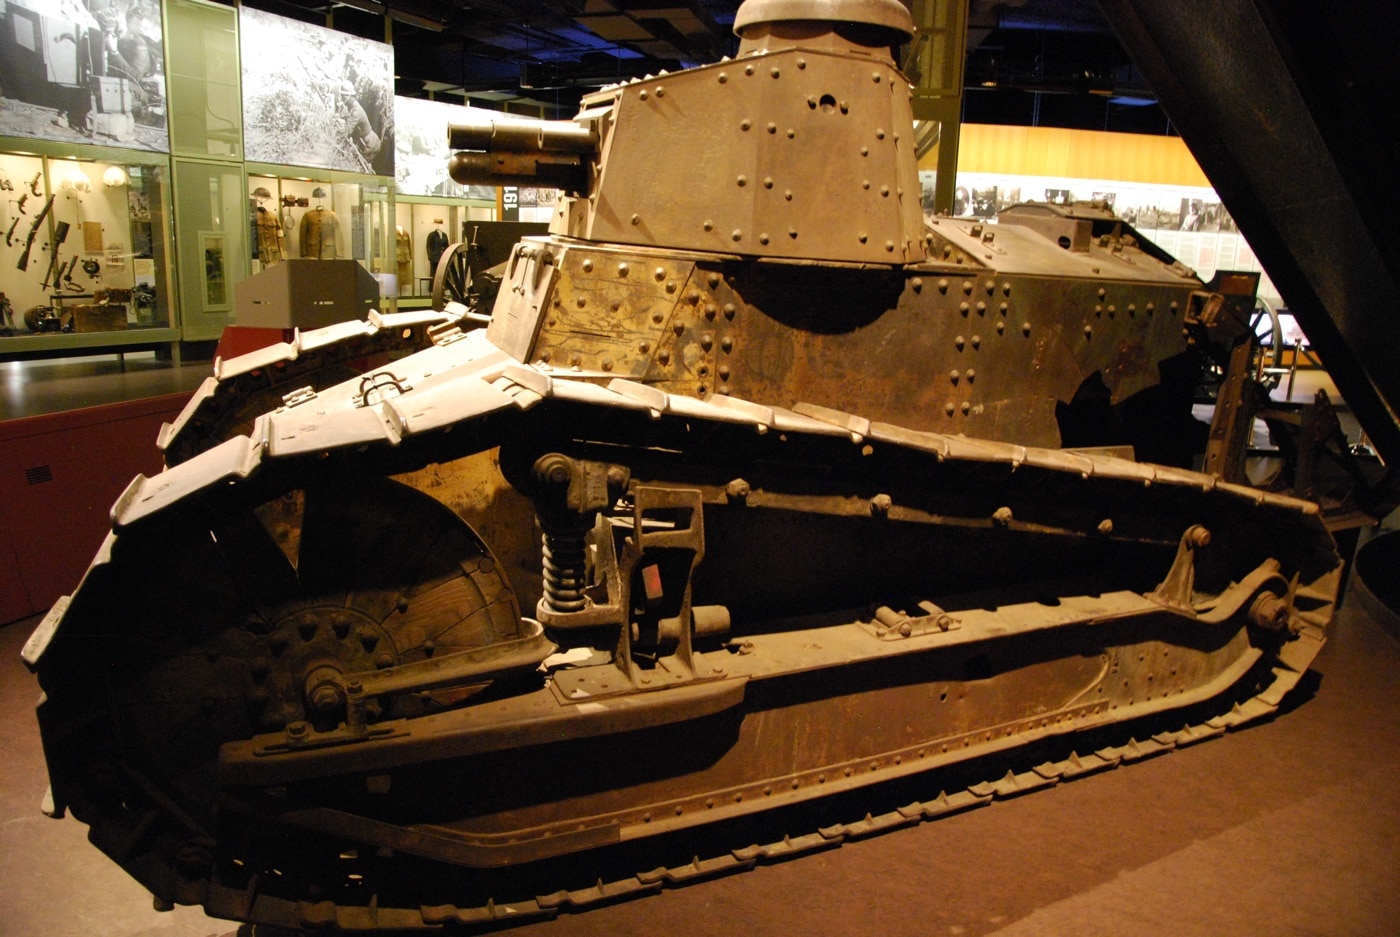 Renault FT tank in National WWI Museum